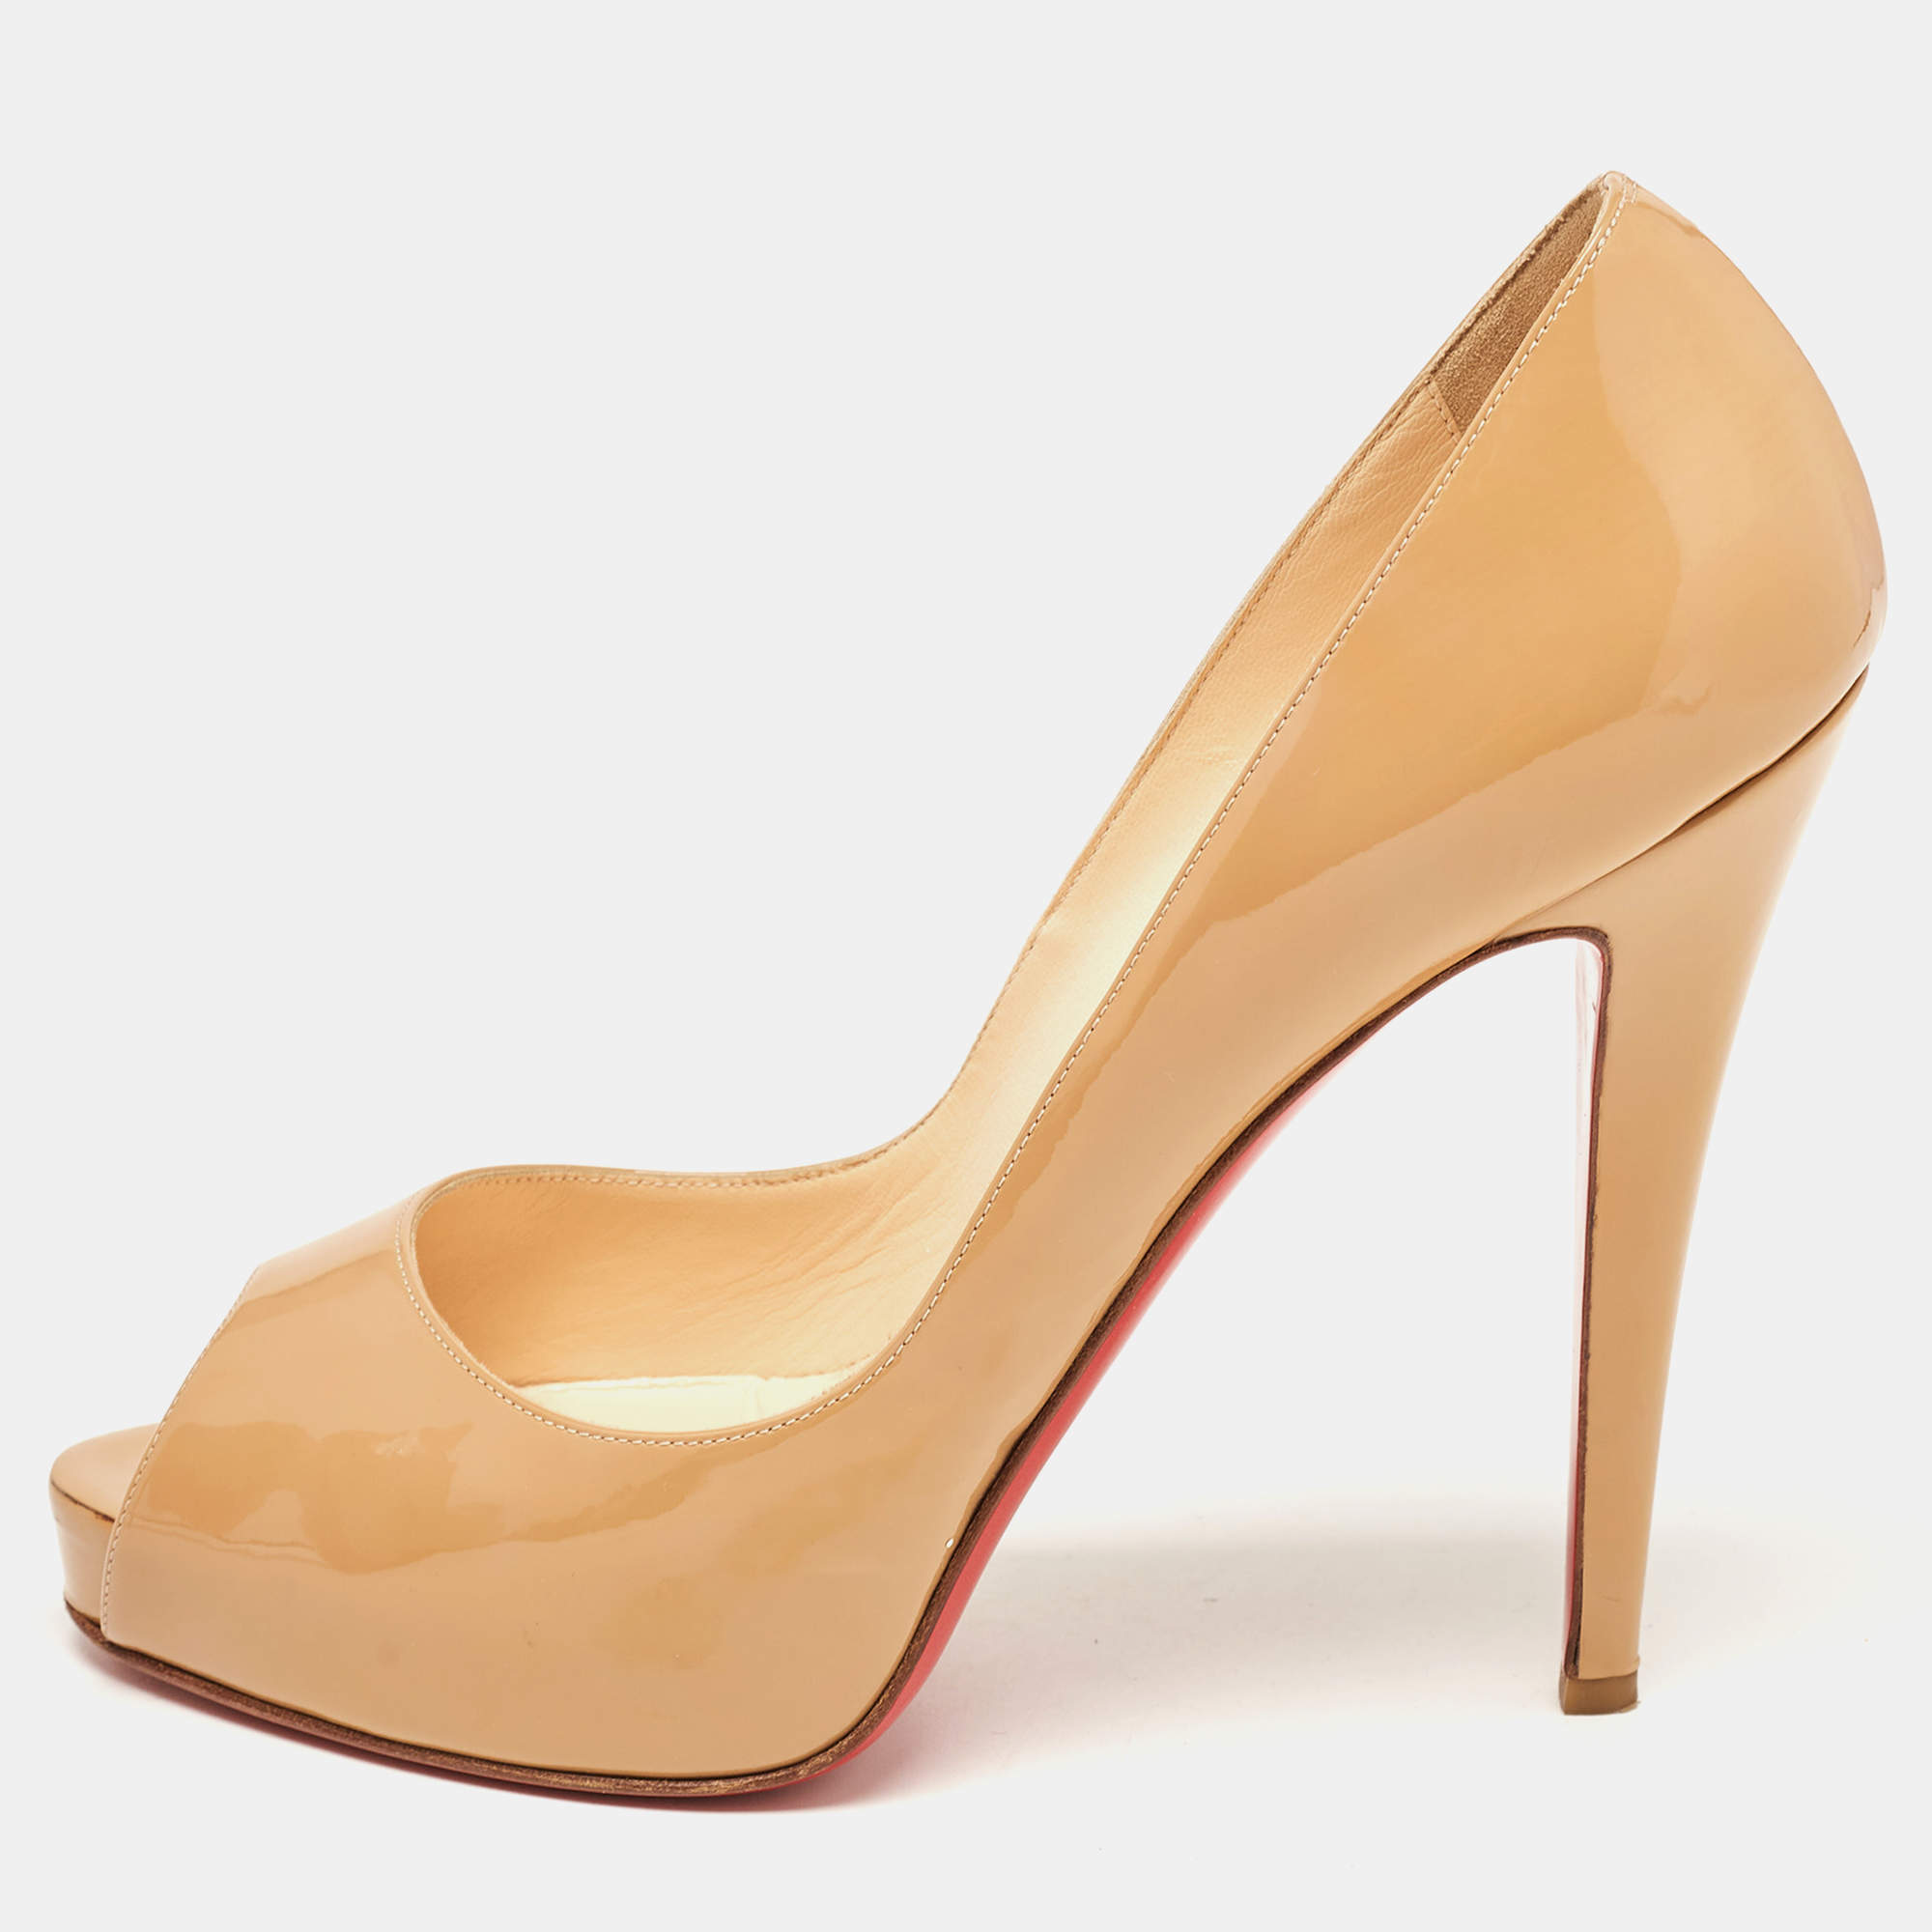 Top Christian Louboutin CL High Heel So Kate Dress Shoes Red Bottoms Nude  Womens Stiletto Heels 8 10 12CM Genuine Leather Point Toe Pumps Designer  From Laynegale, $77.39 | DHgate.Com